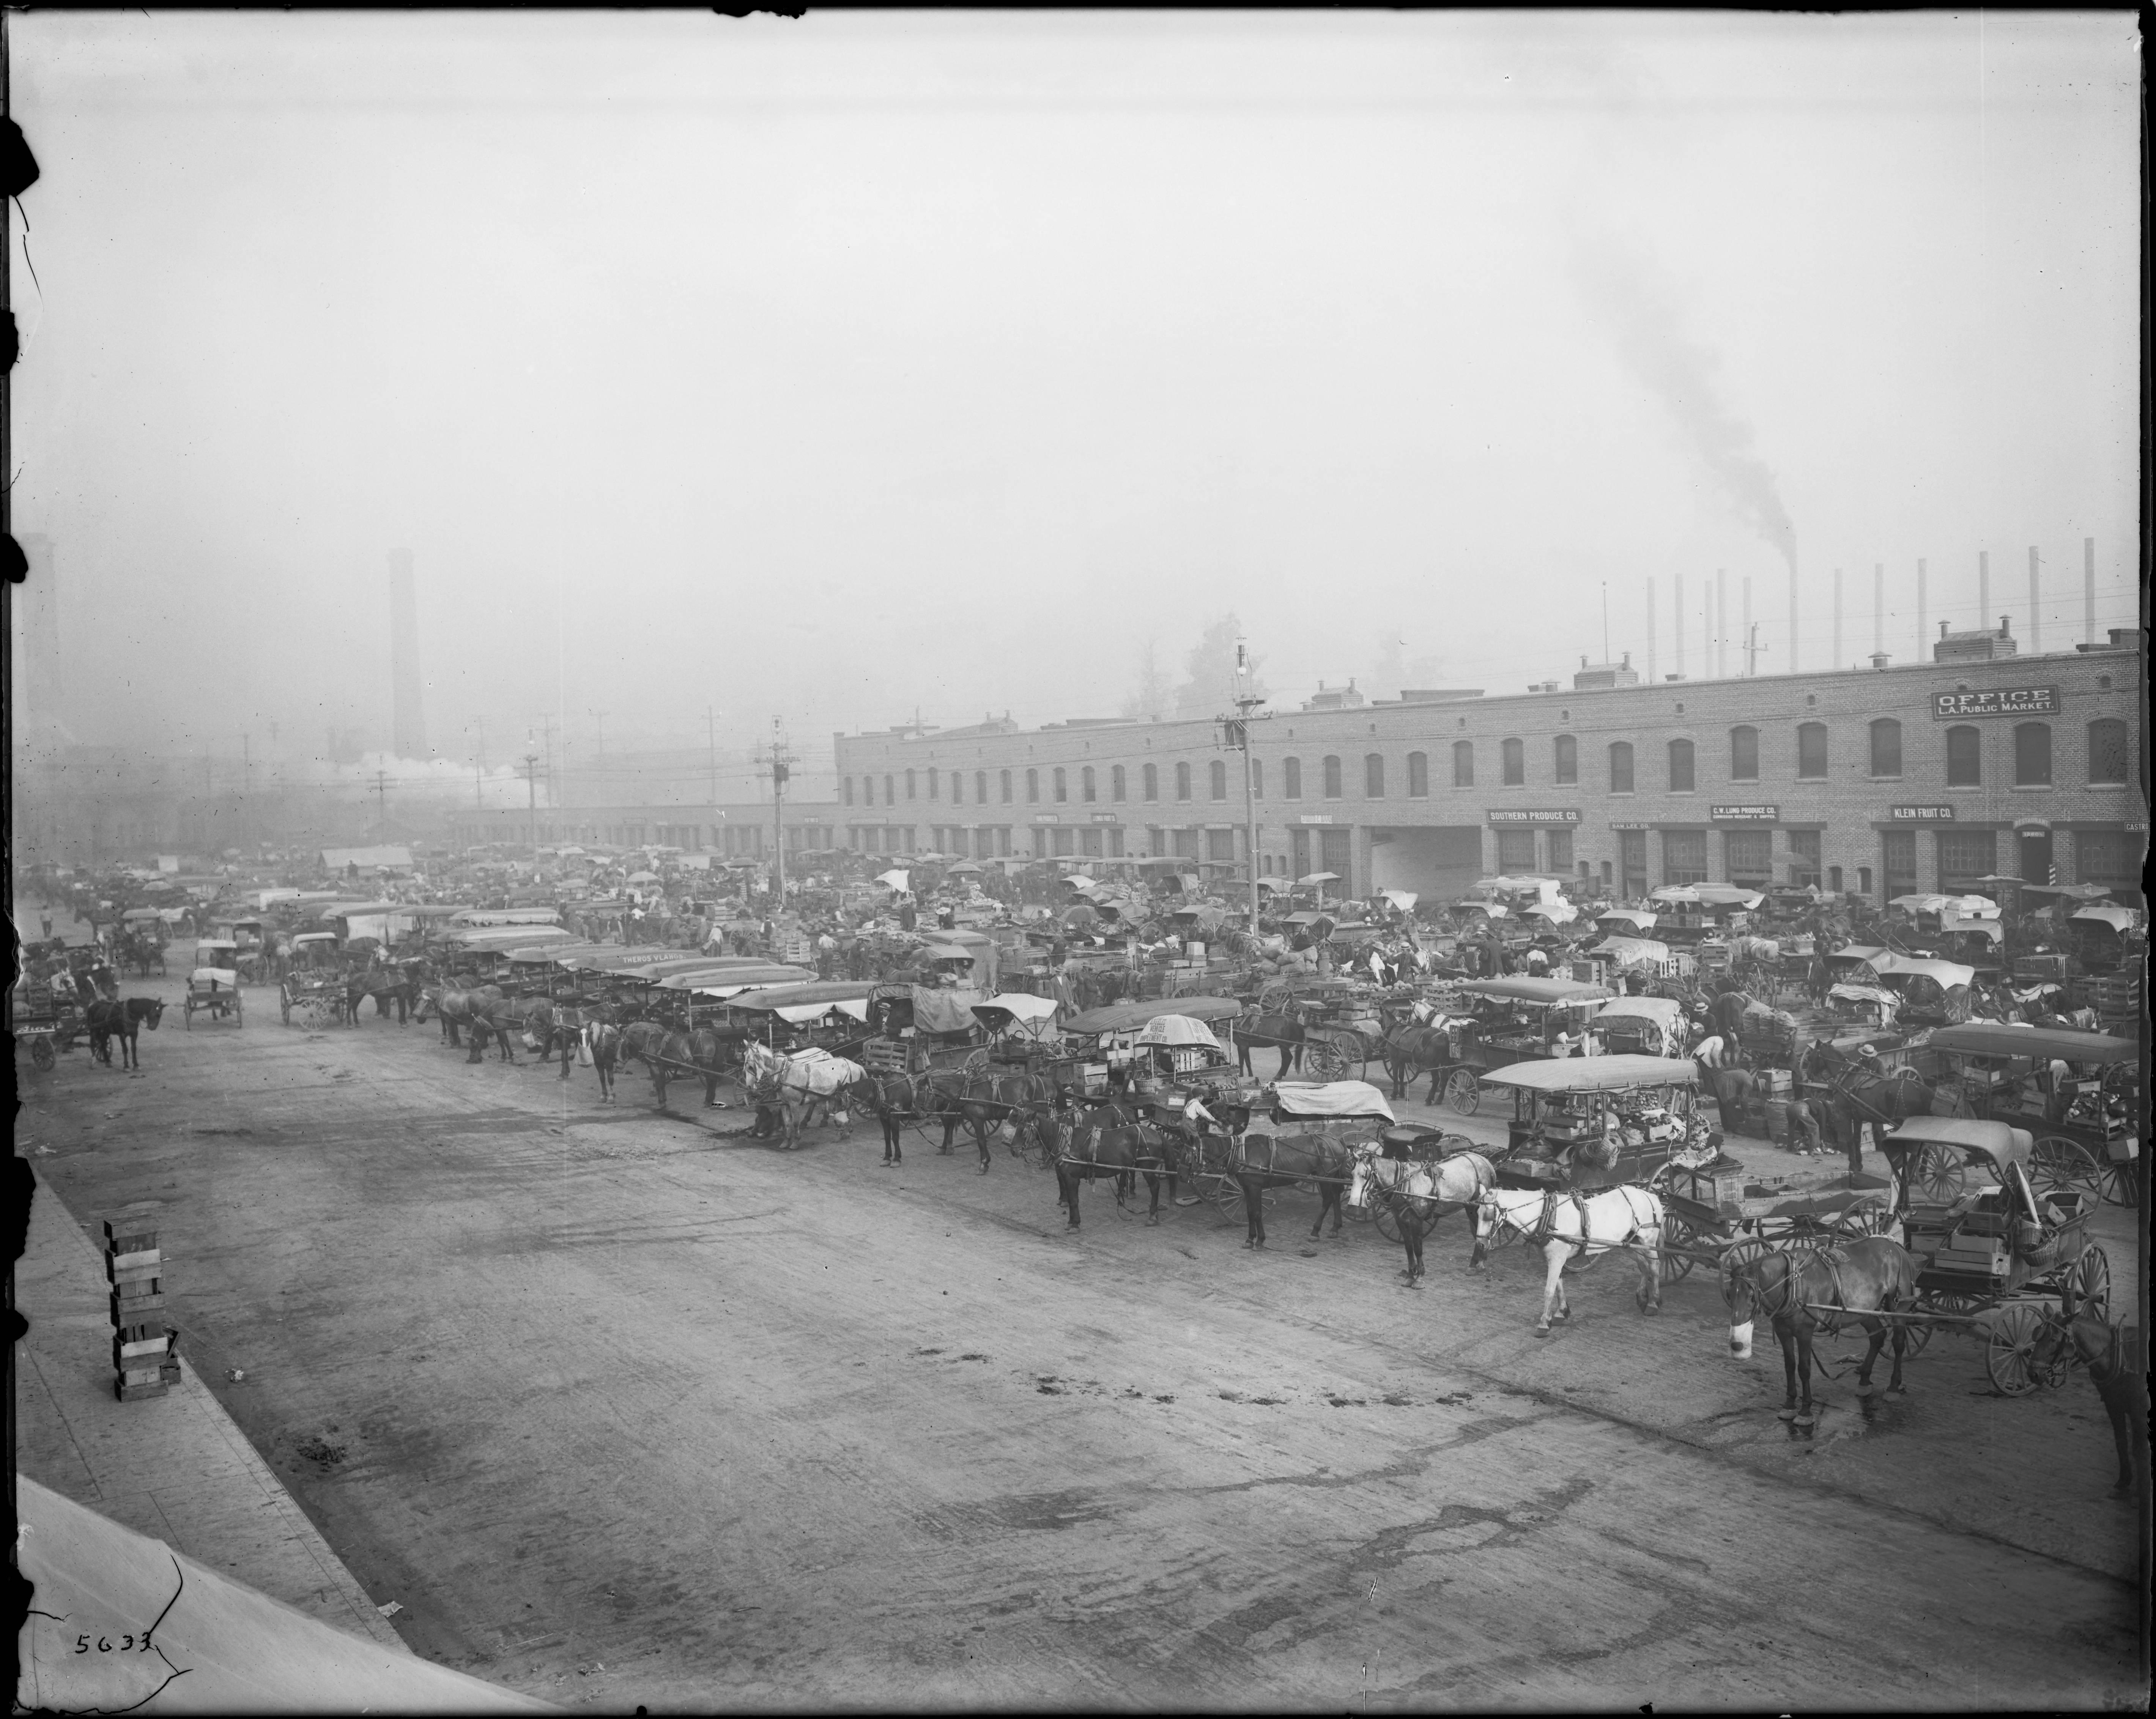 https://upload.wikimedia.org/wikipedia/commons/c/c2/View_of_Central_Market%2C_showing_many_horses_and_wagons_loaded_with_produce%2C_Alameda_Street_and_Sixth_Street%2C_Los_Angeles%2C_ca.1905_%28CHS-5633%29.jpg